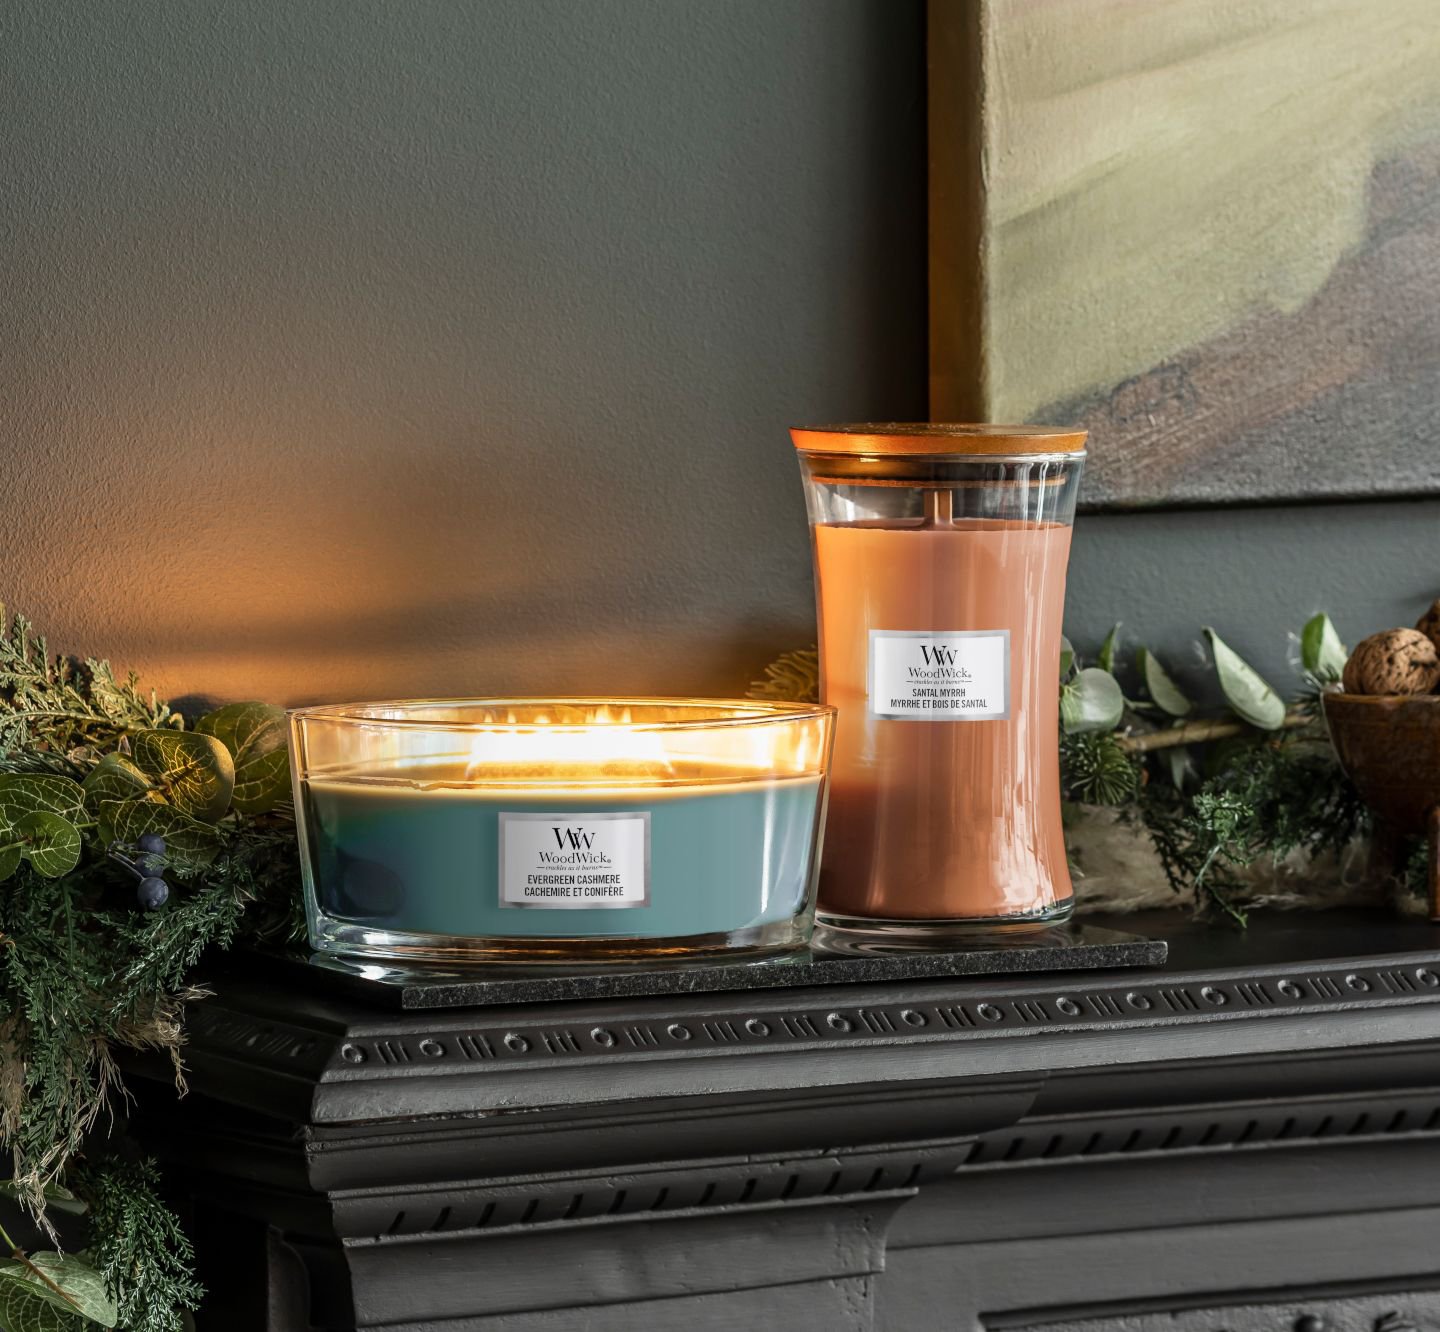 Evergreen Cashmere WoodWick® Large Hourglass Candle - Large Hourglass  Candles